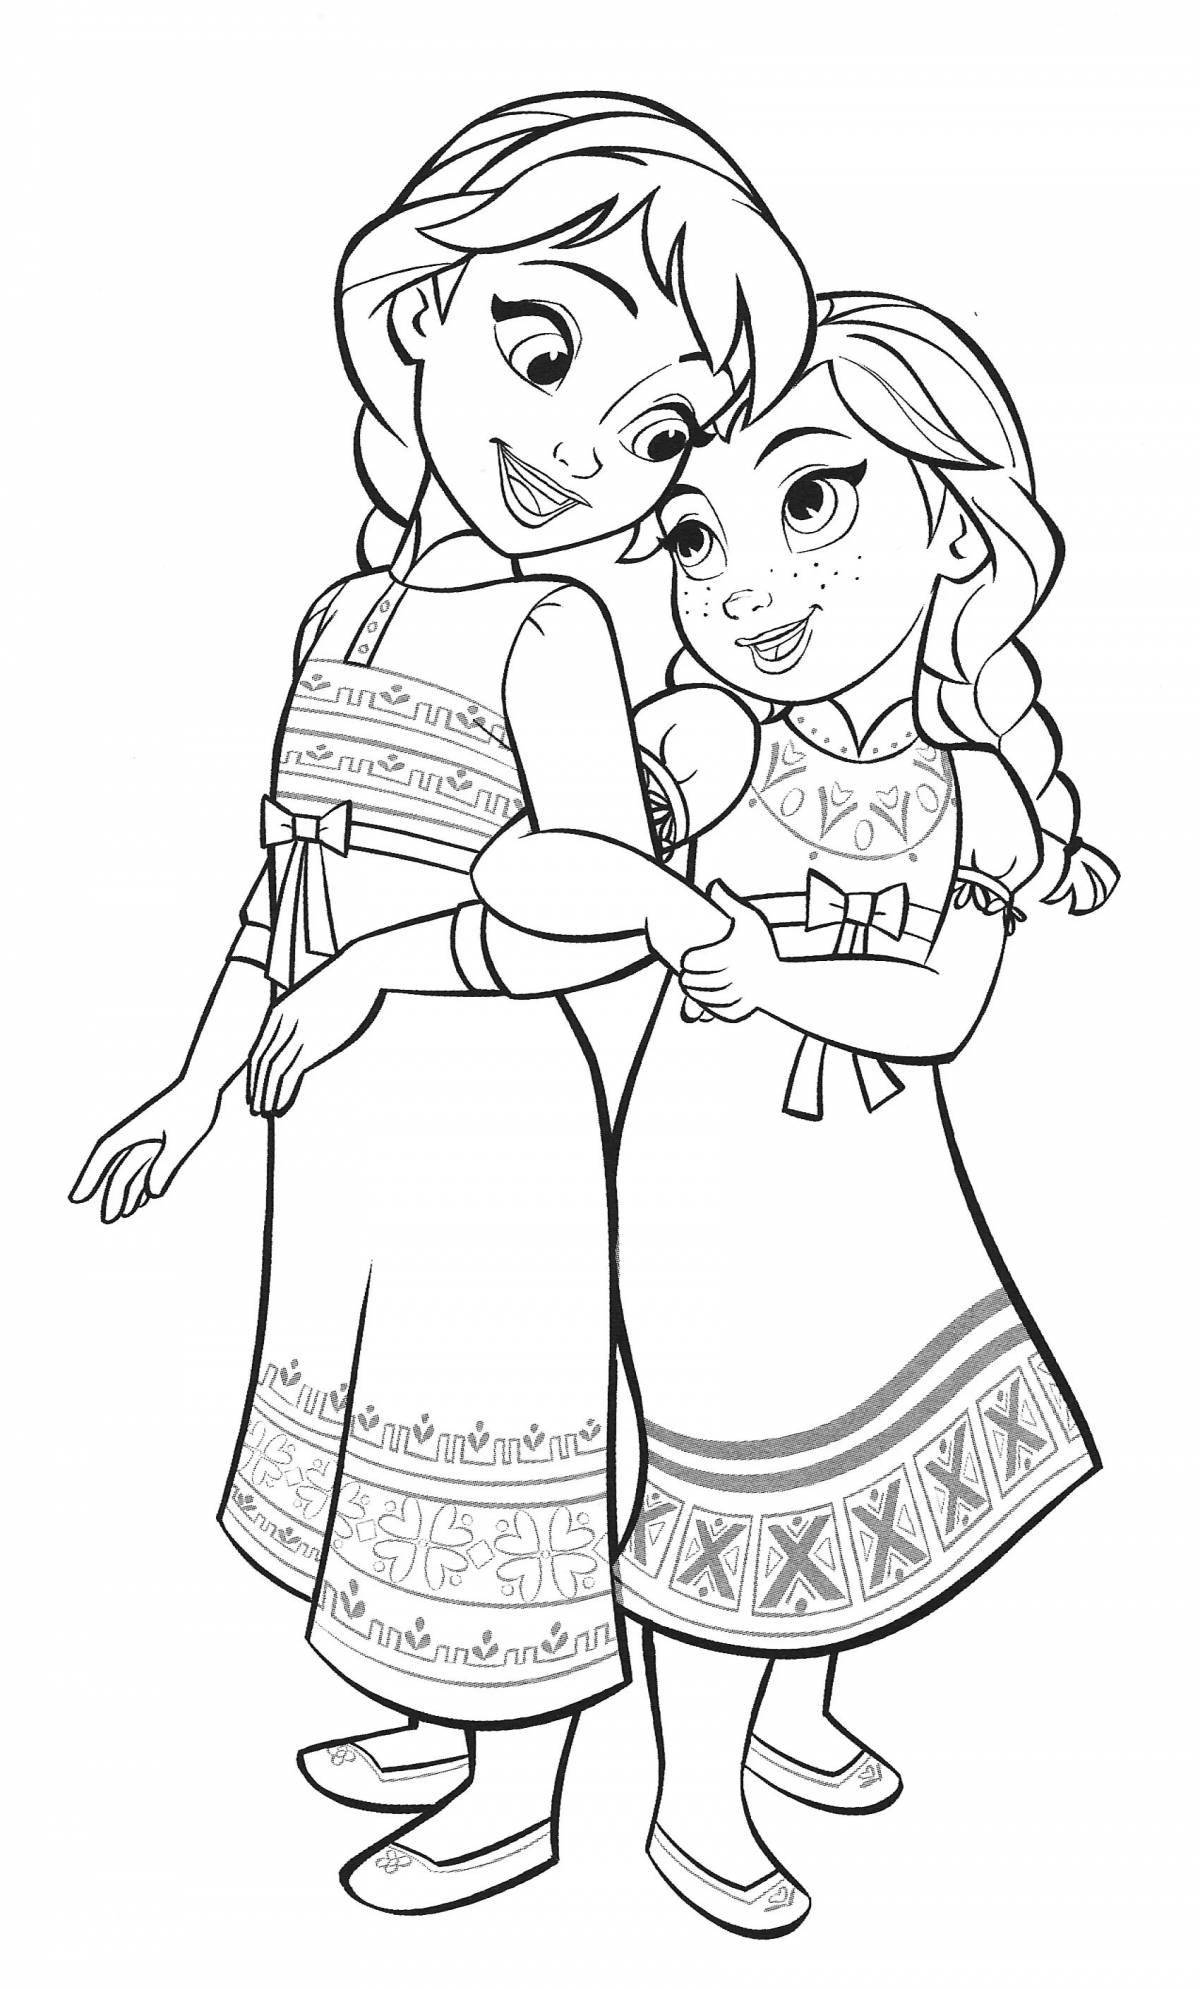 Exquisite elsa and anna frozen 2 coloring book